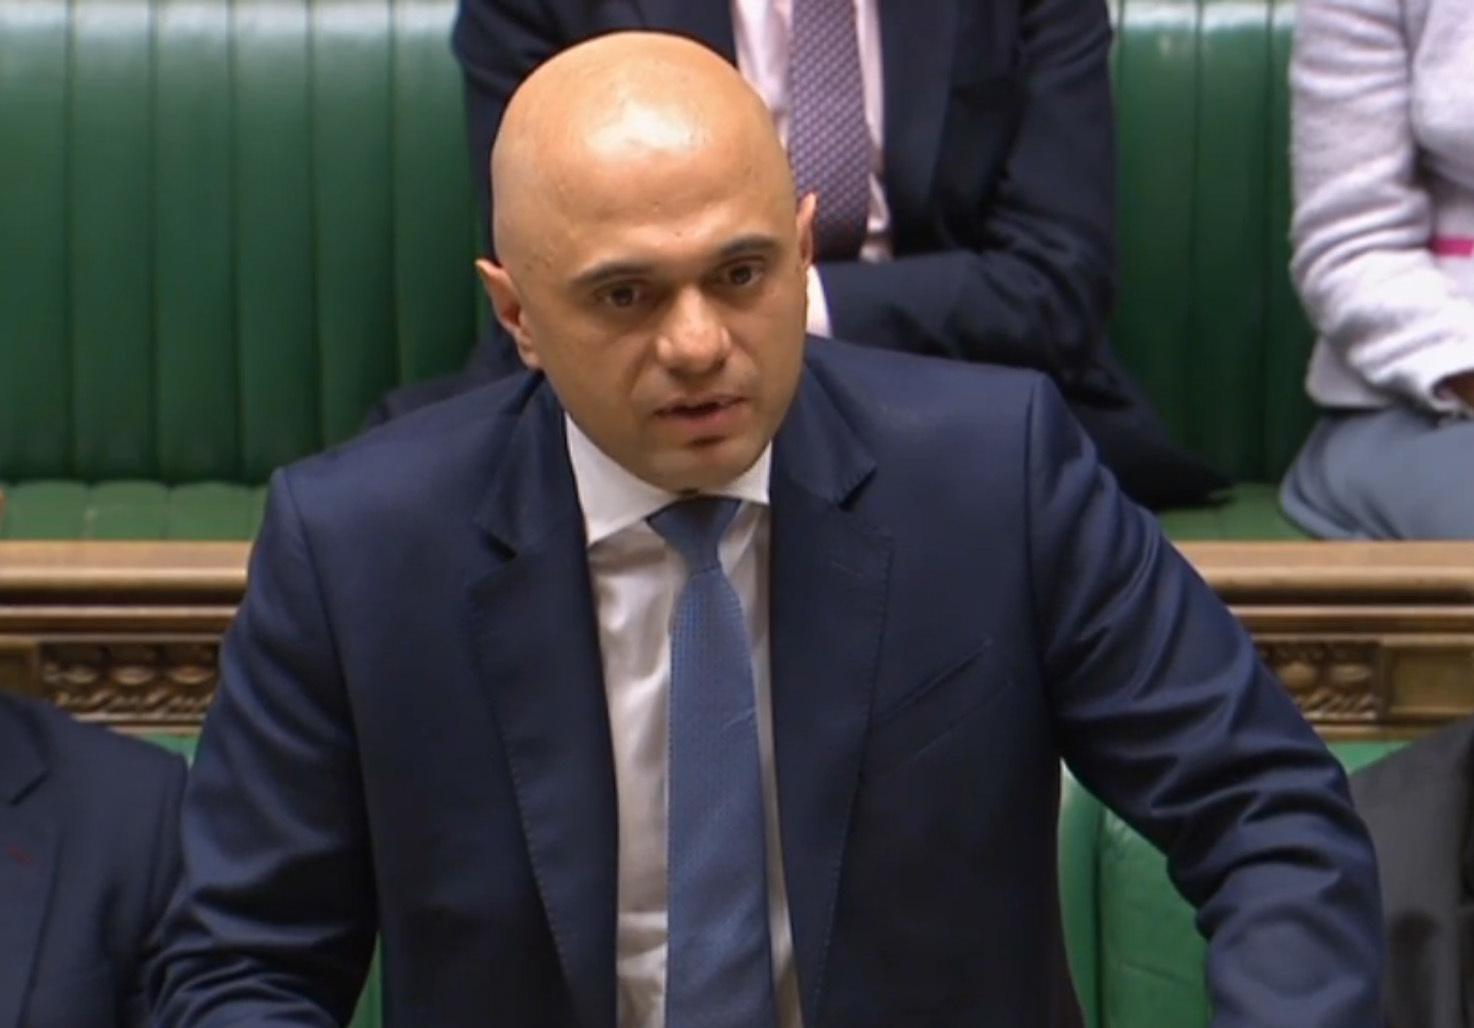 A personal connection to the immigration issue offers Mr Javid a potential level of insight that Amber Rudd could never match